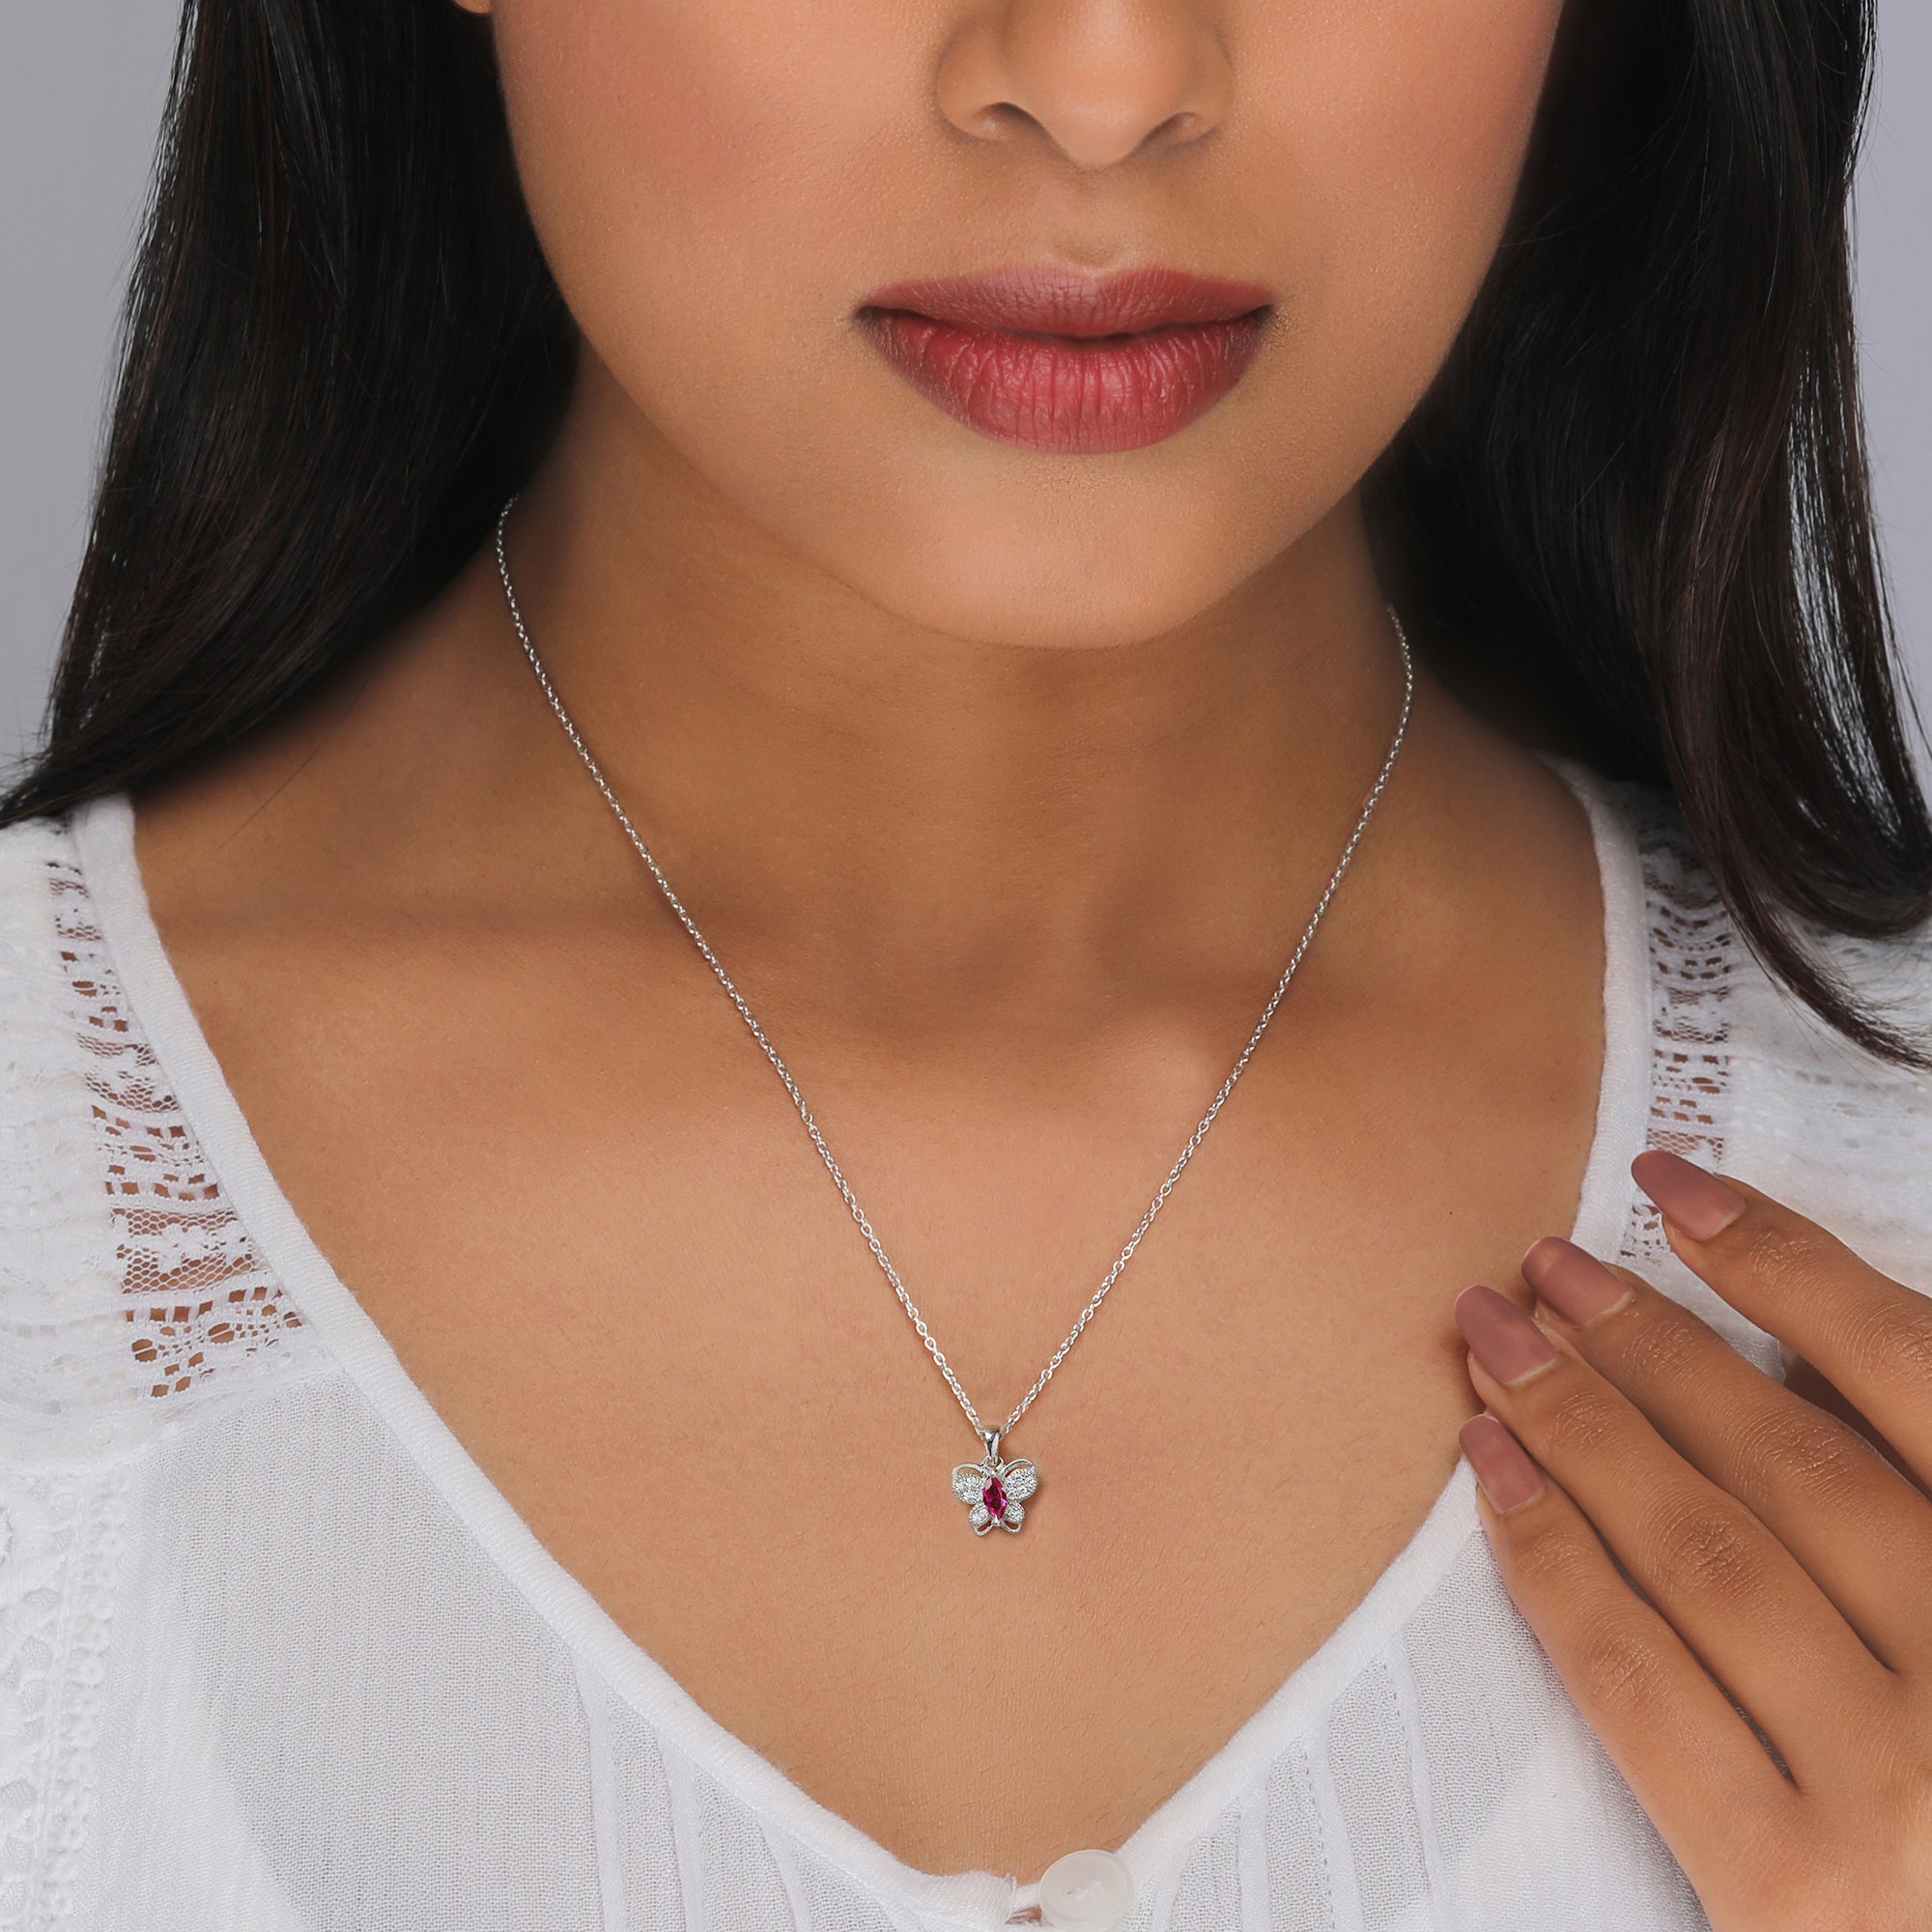 Sorellaz Womens White Butterfly Pendant Necklace Metal Chain Price in India  - Buy Sorellaz Womens White Butterfly Pendant Necklace Metal Chain Online  at Best Prices in India | Flipkart.com